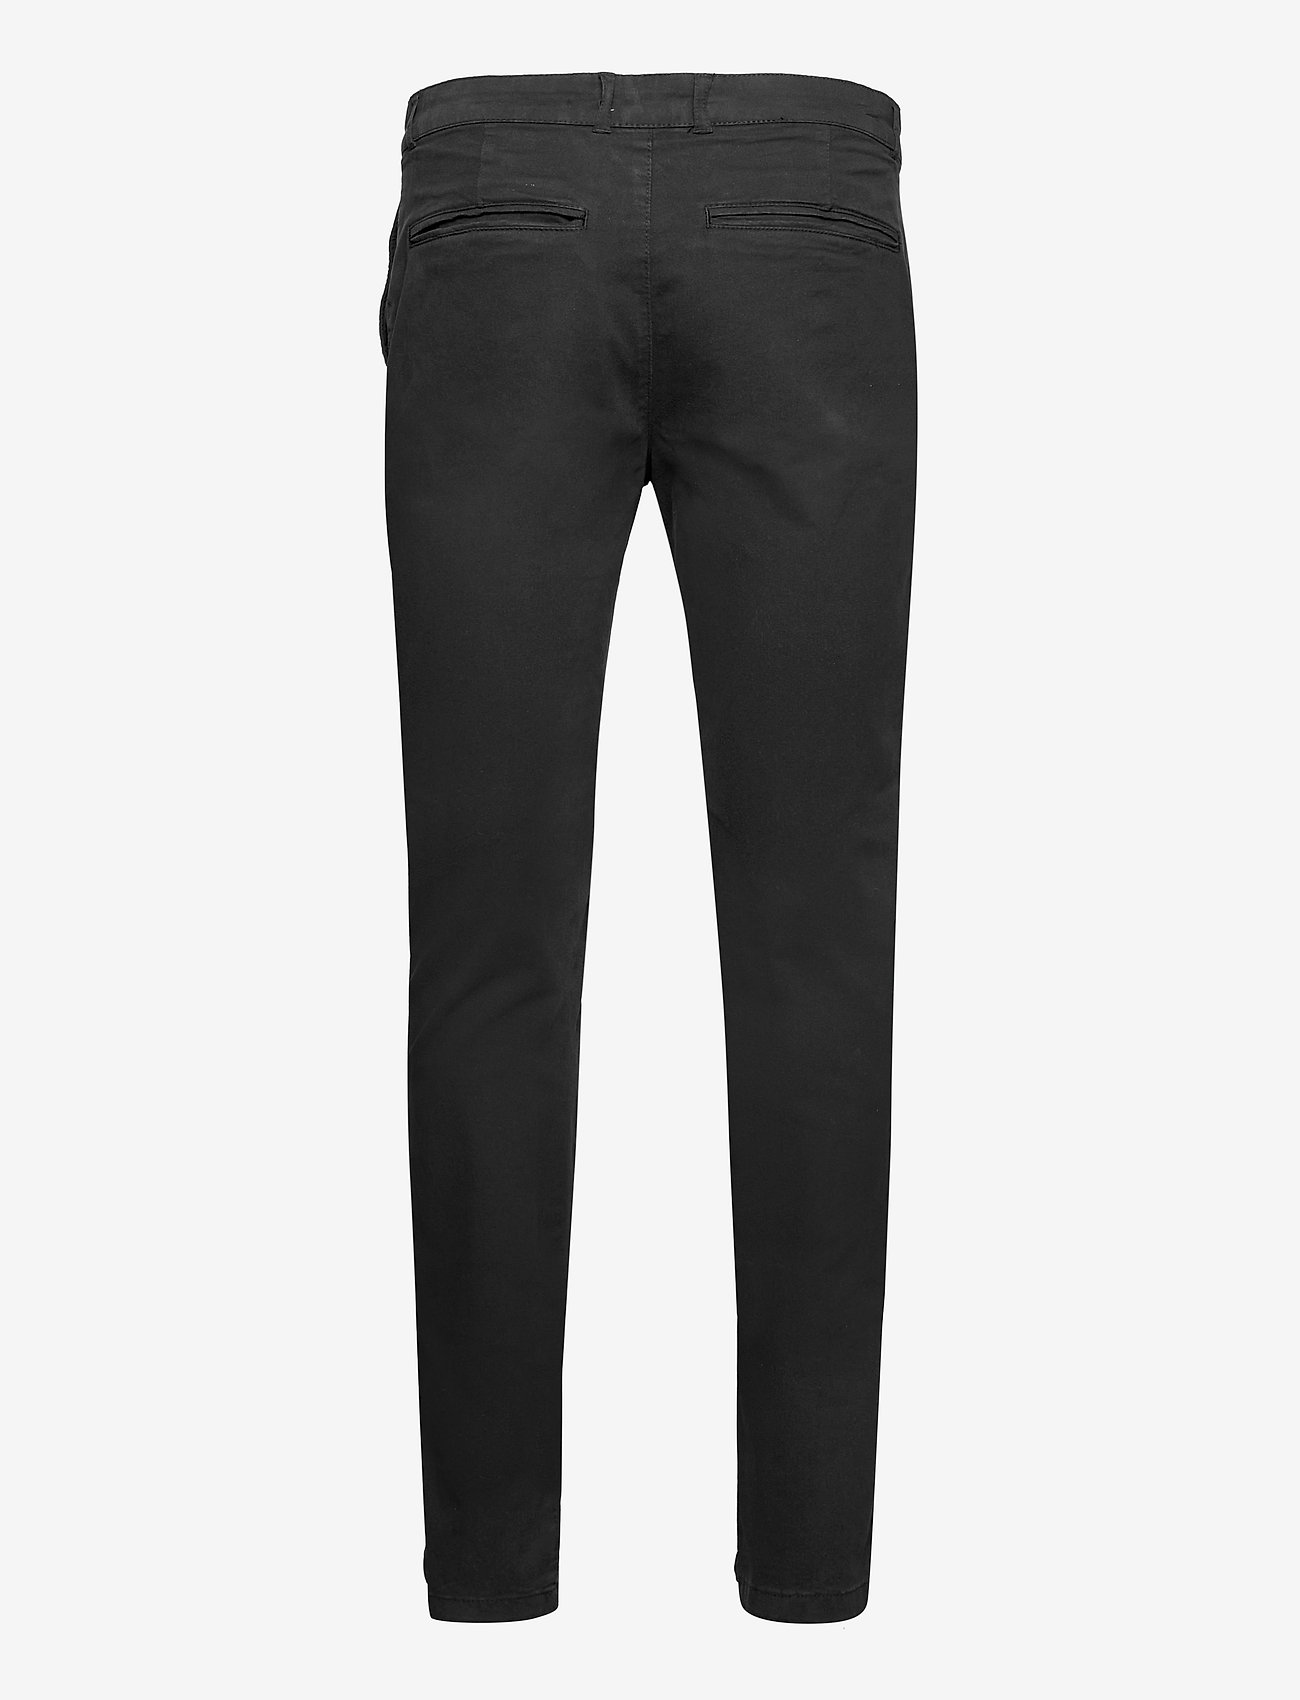 By Garment Makers - The Organic Chino Pants - chinos - jet black - 1